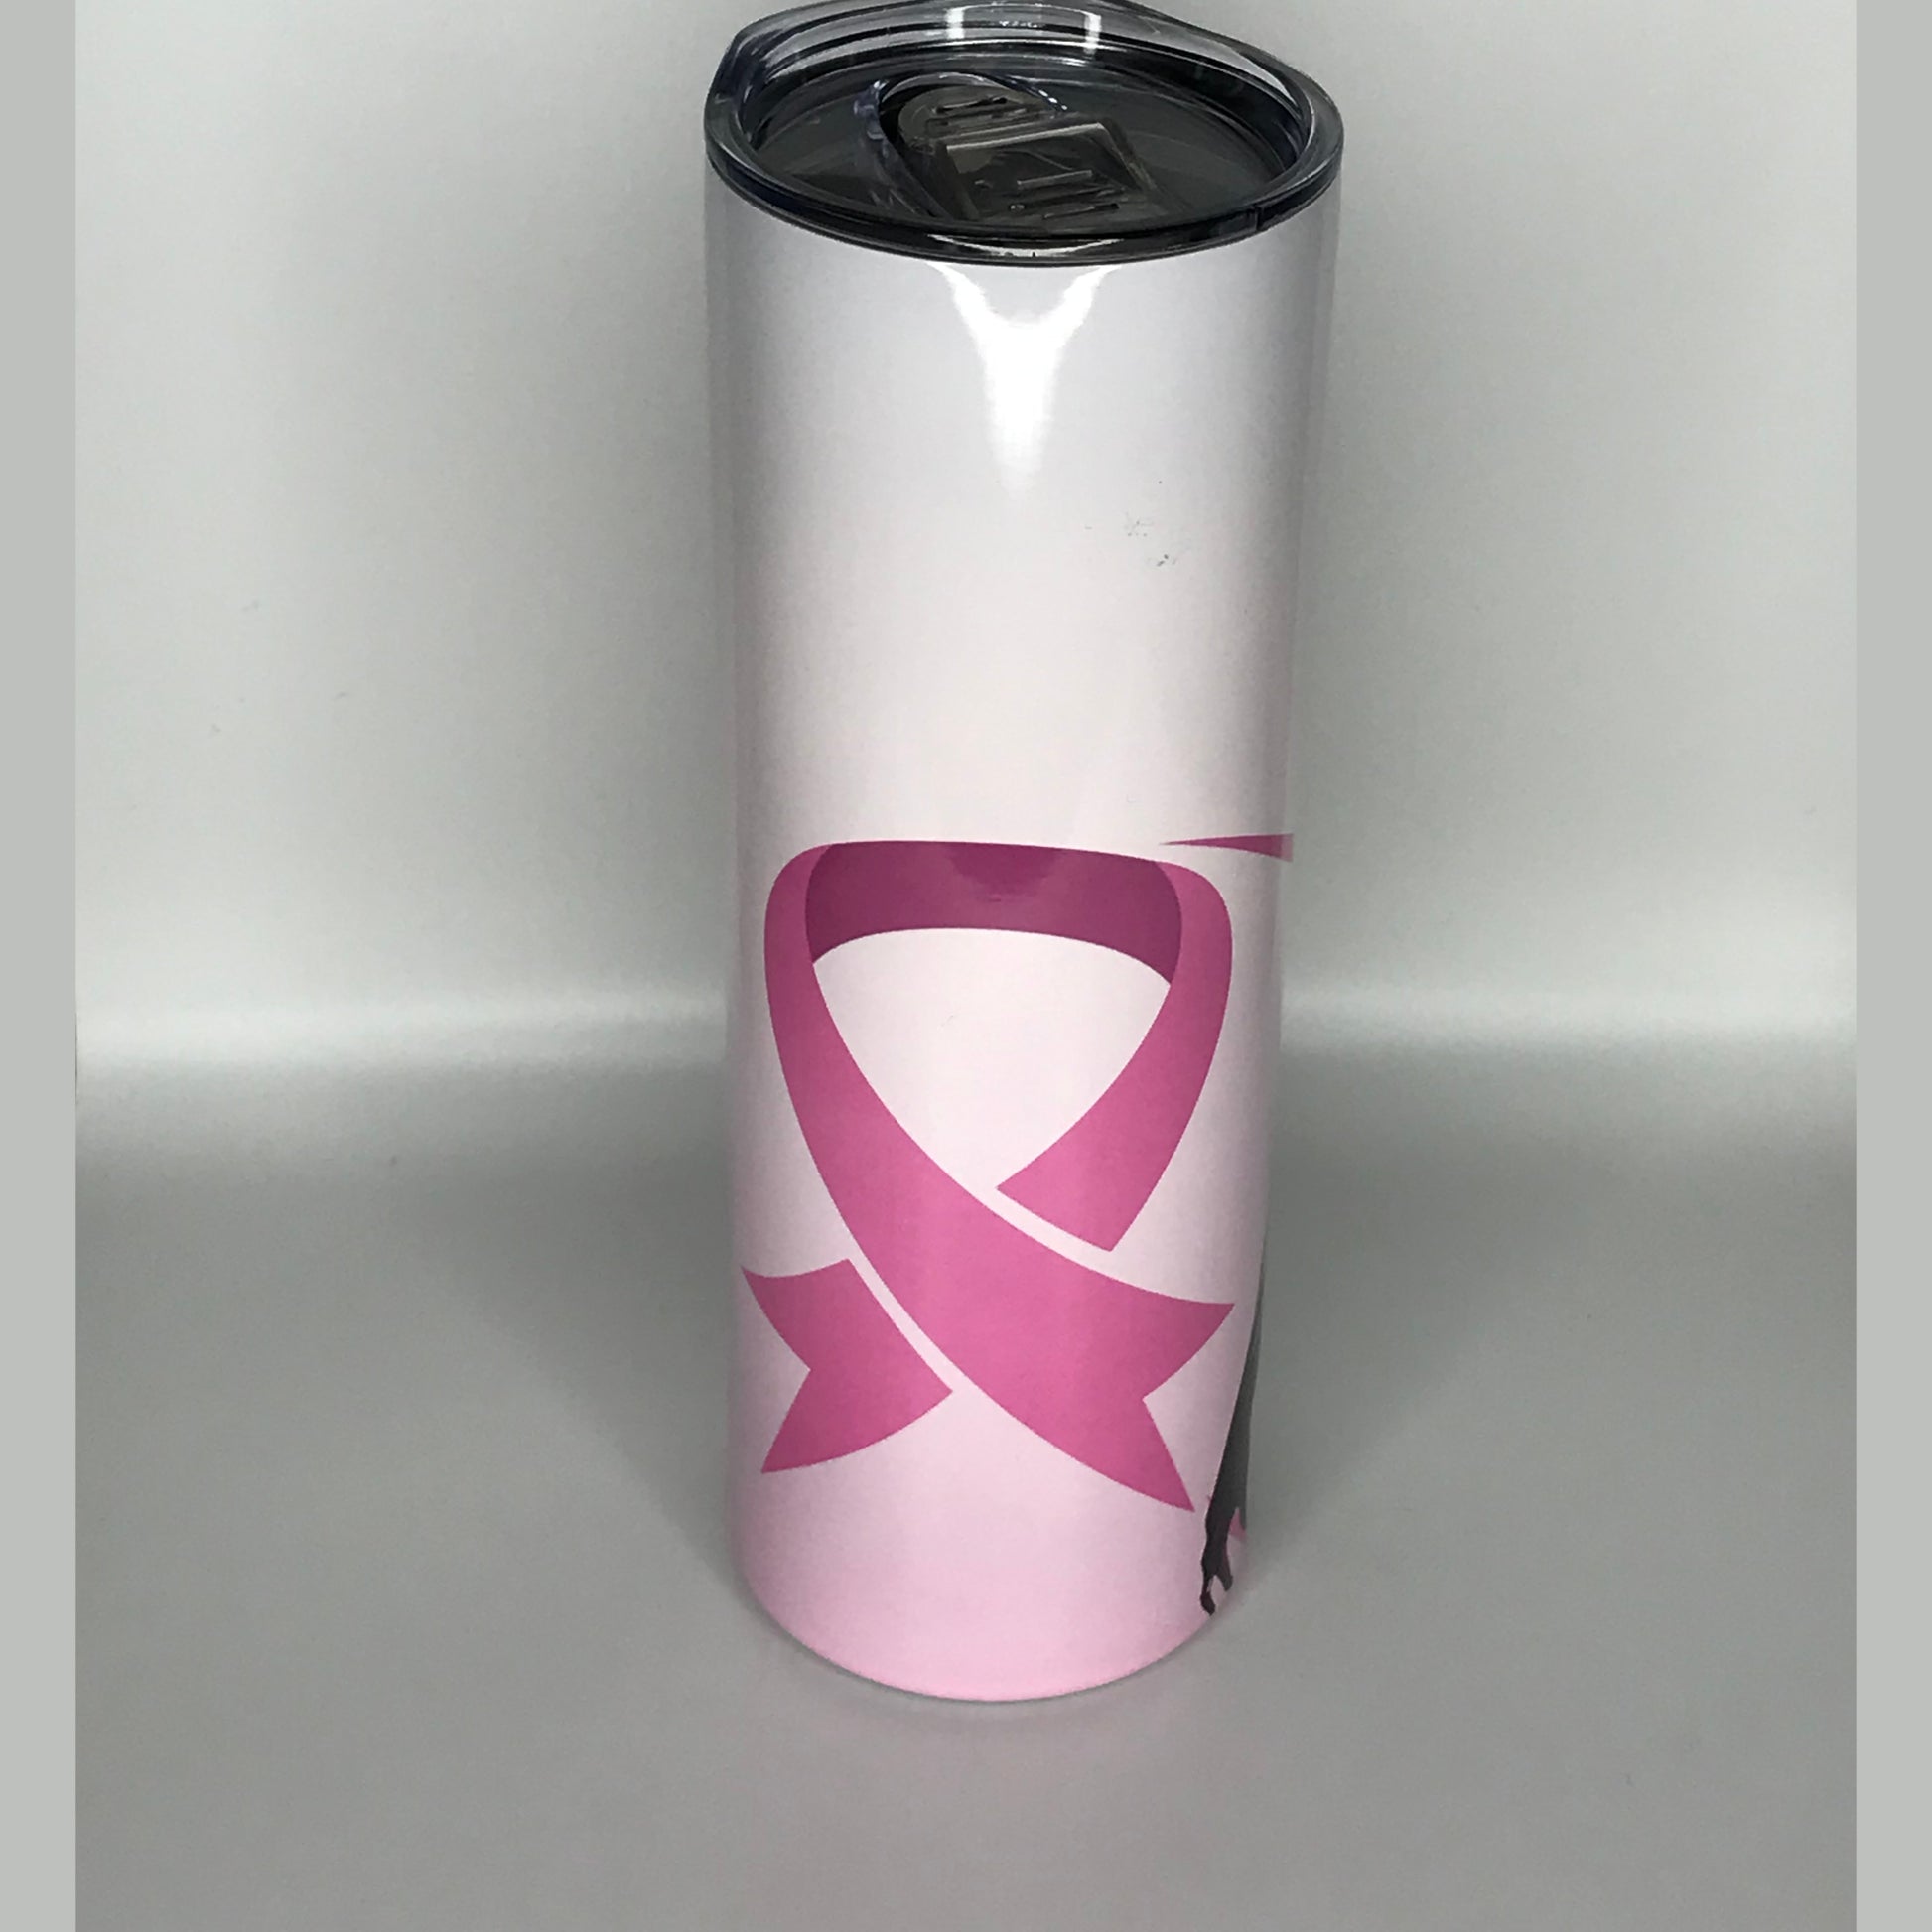 Black Panther Breast Cancer Tumbler Custom Tumblers Bambi Rae Collections   